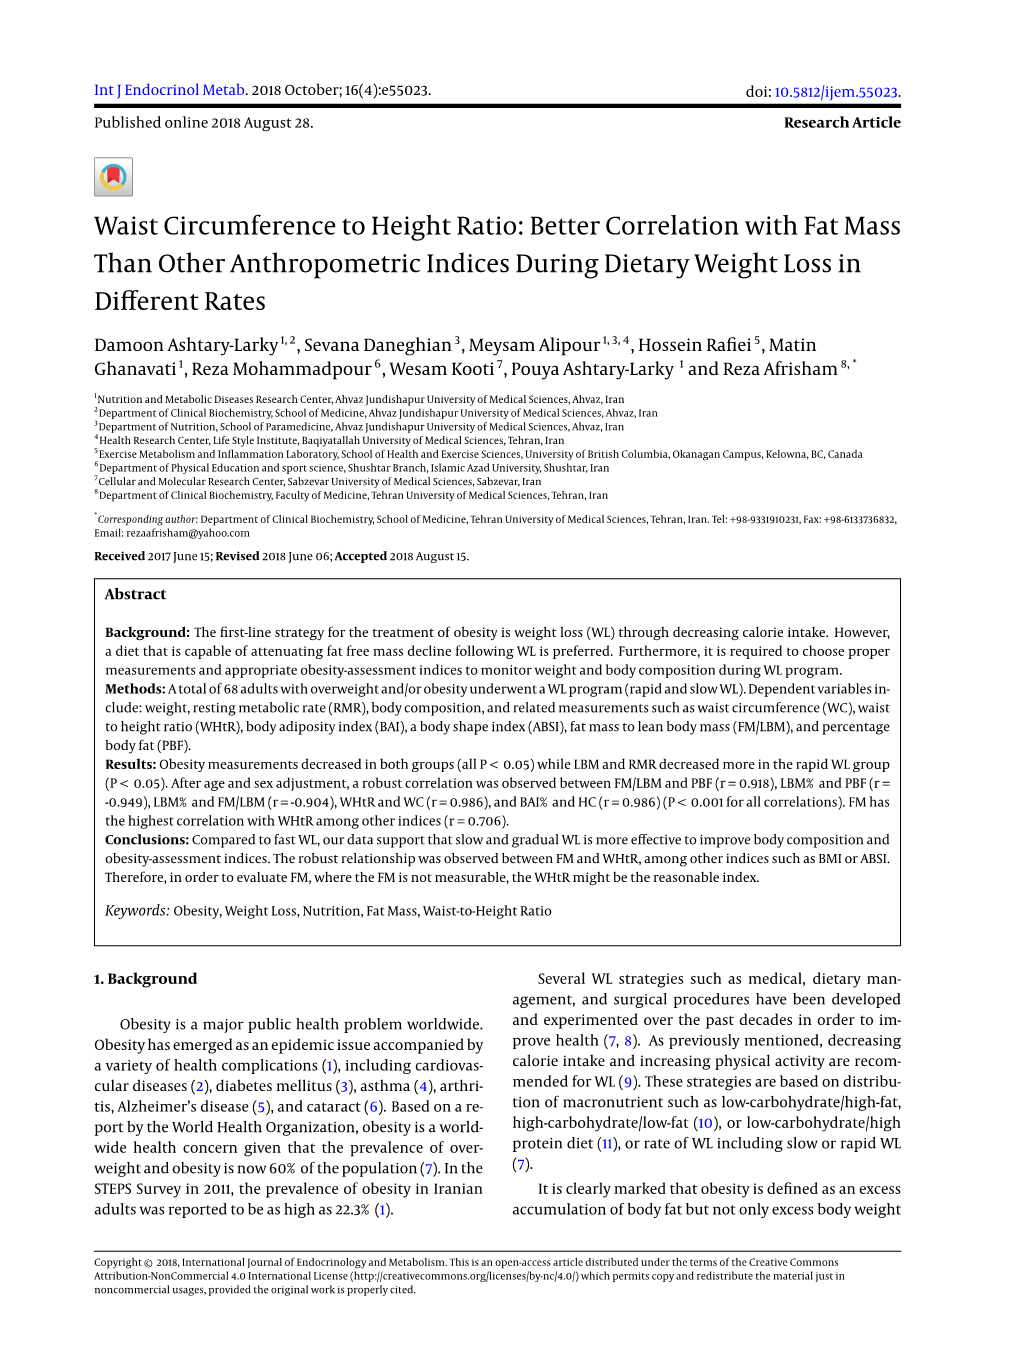 Waist Circumference to Height Ratio: Better Correlation with Fat Mass Than Other Anthropometric Indices During Dietary Weight Loss in Diﬀerent Rates